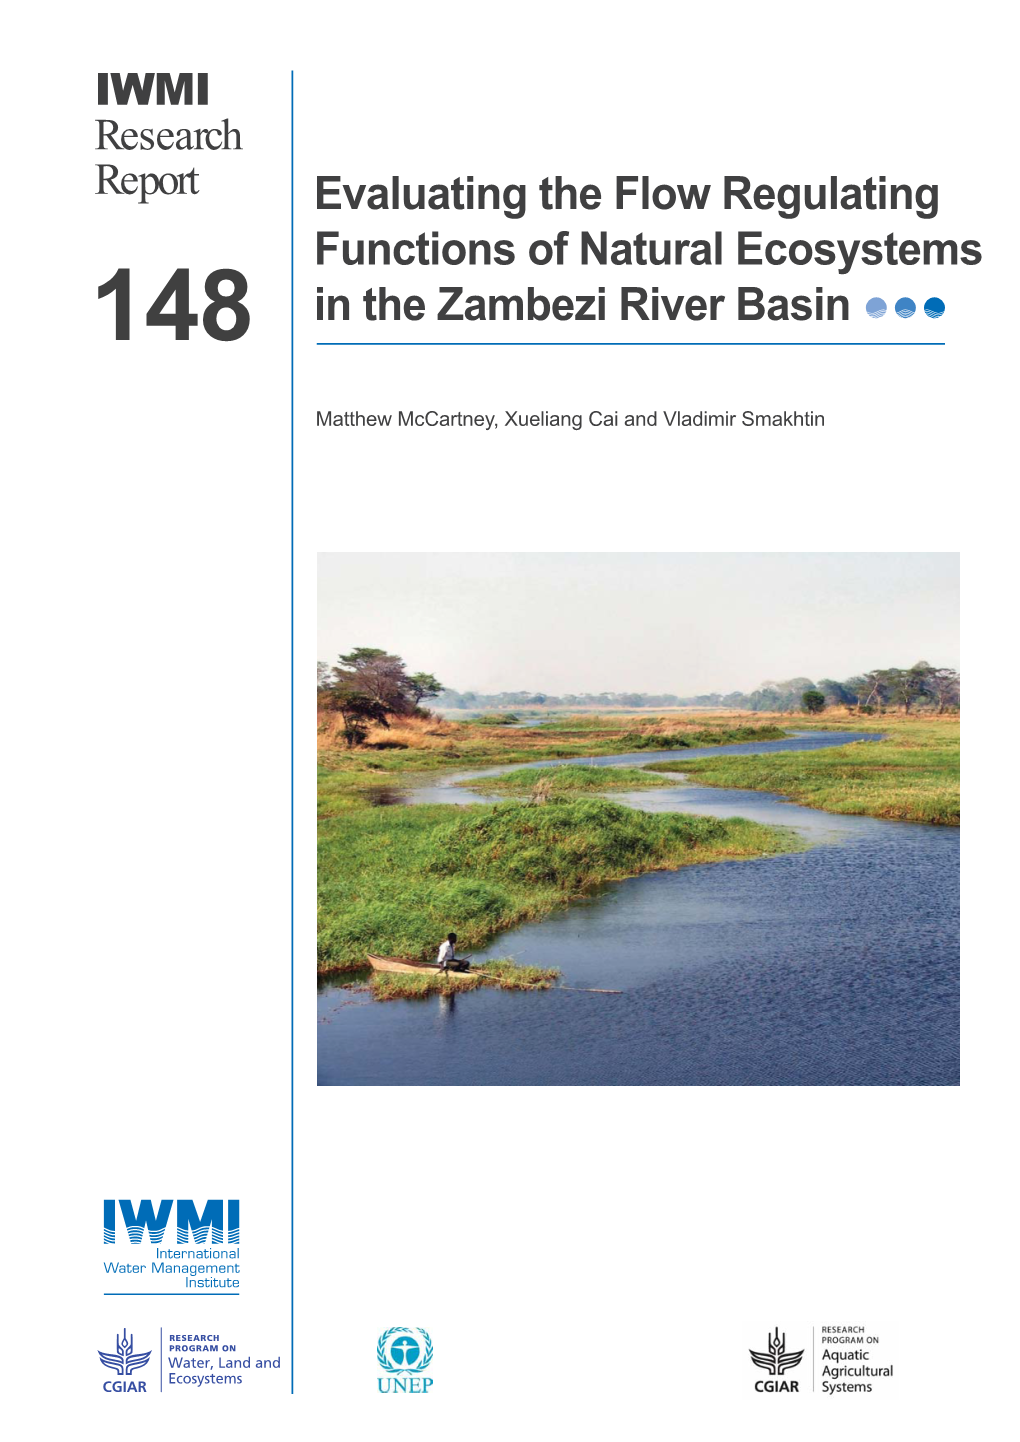 Evaluating the Flow Regulating Functions of Natural Ecosystems in the Zambezi River Basin